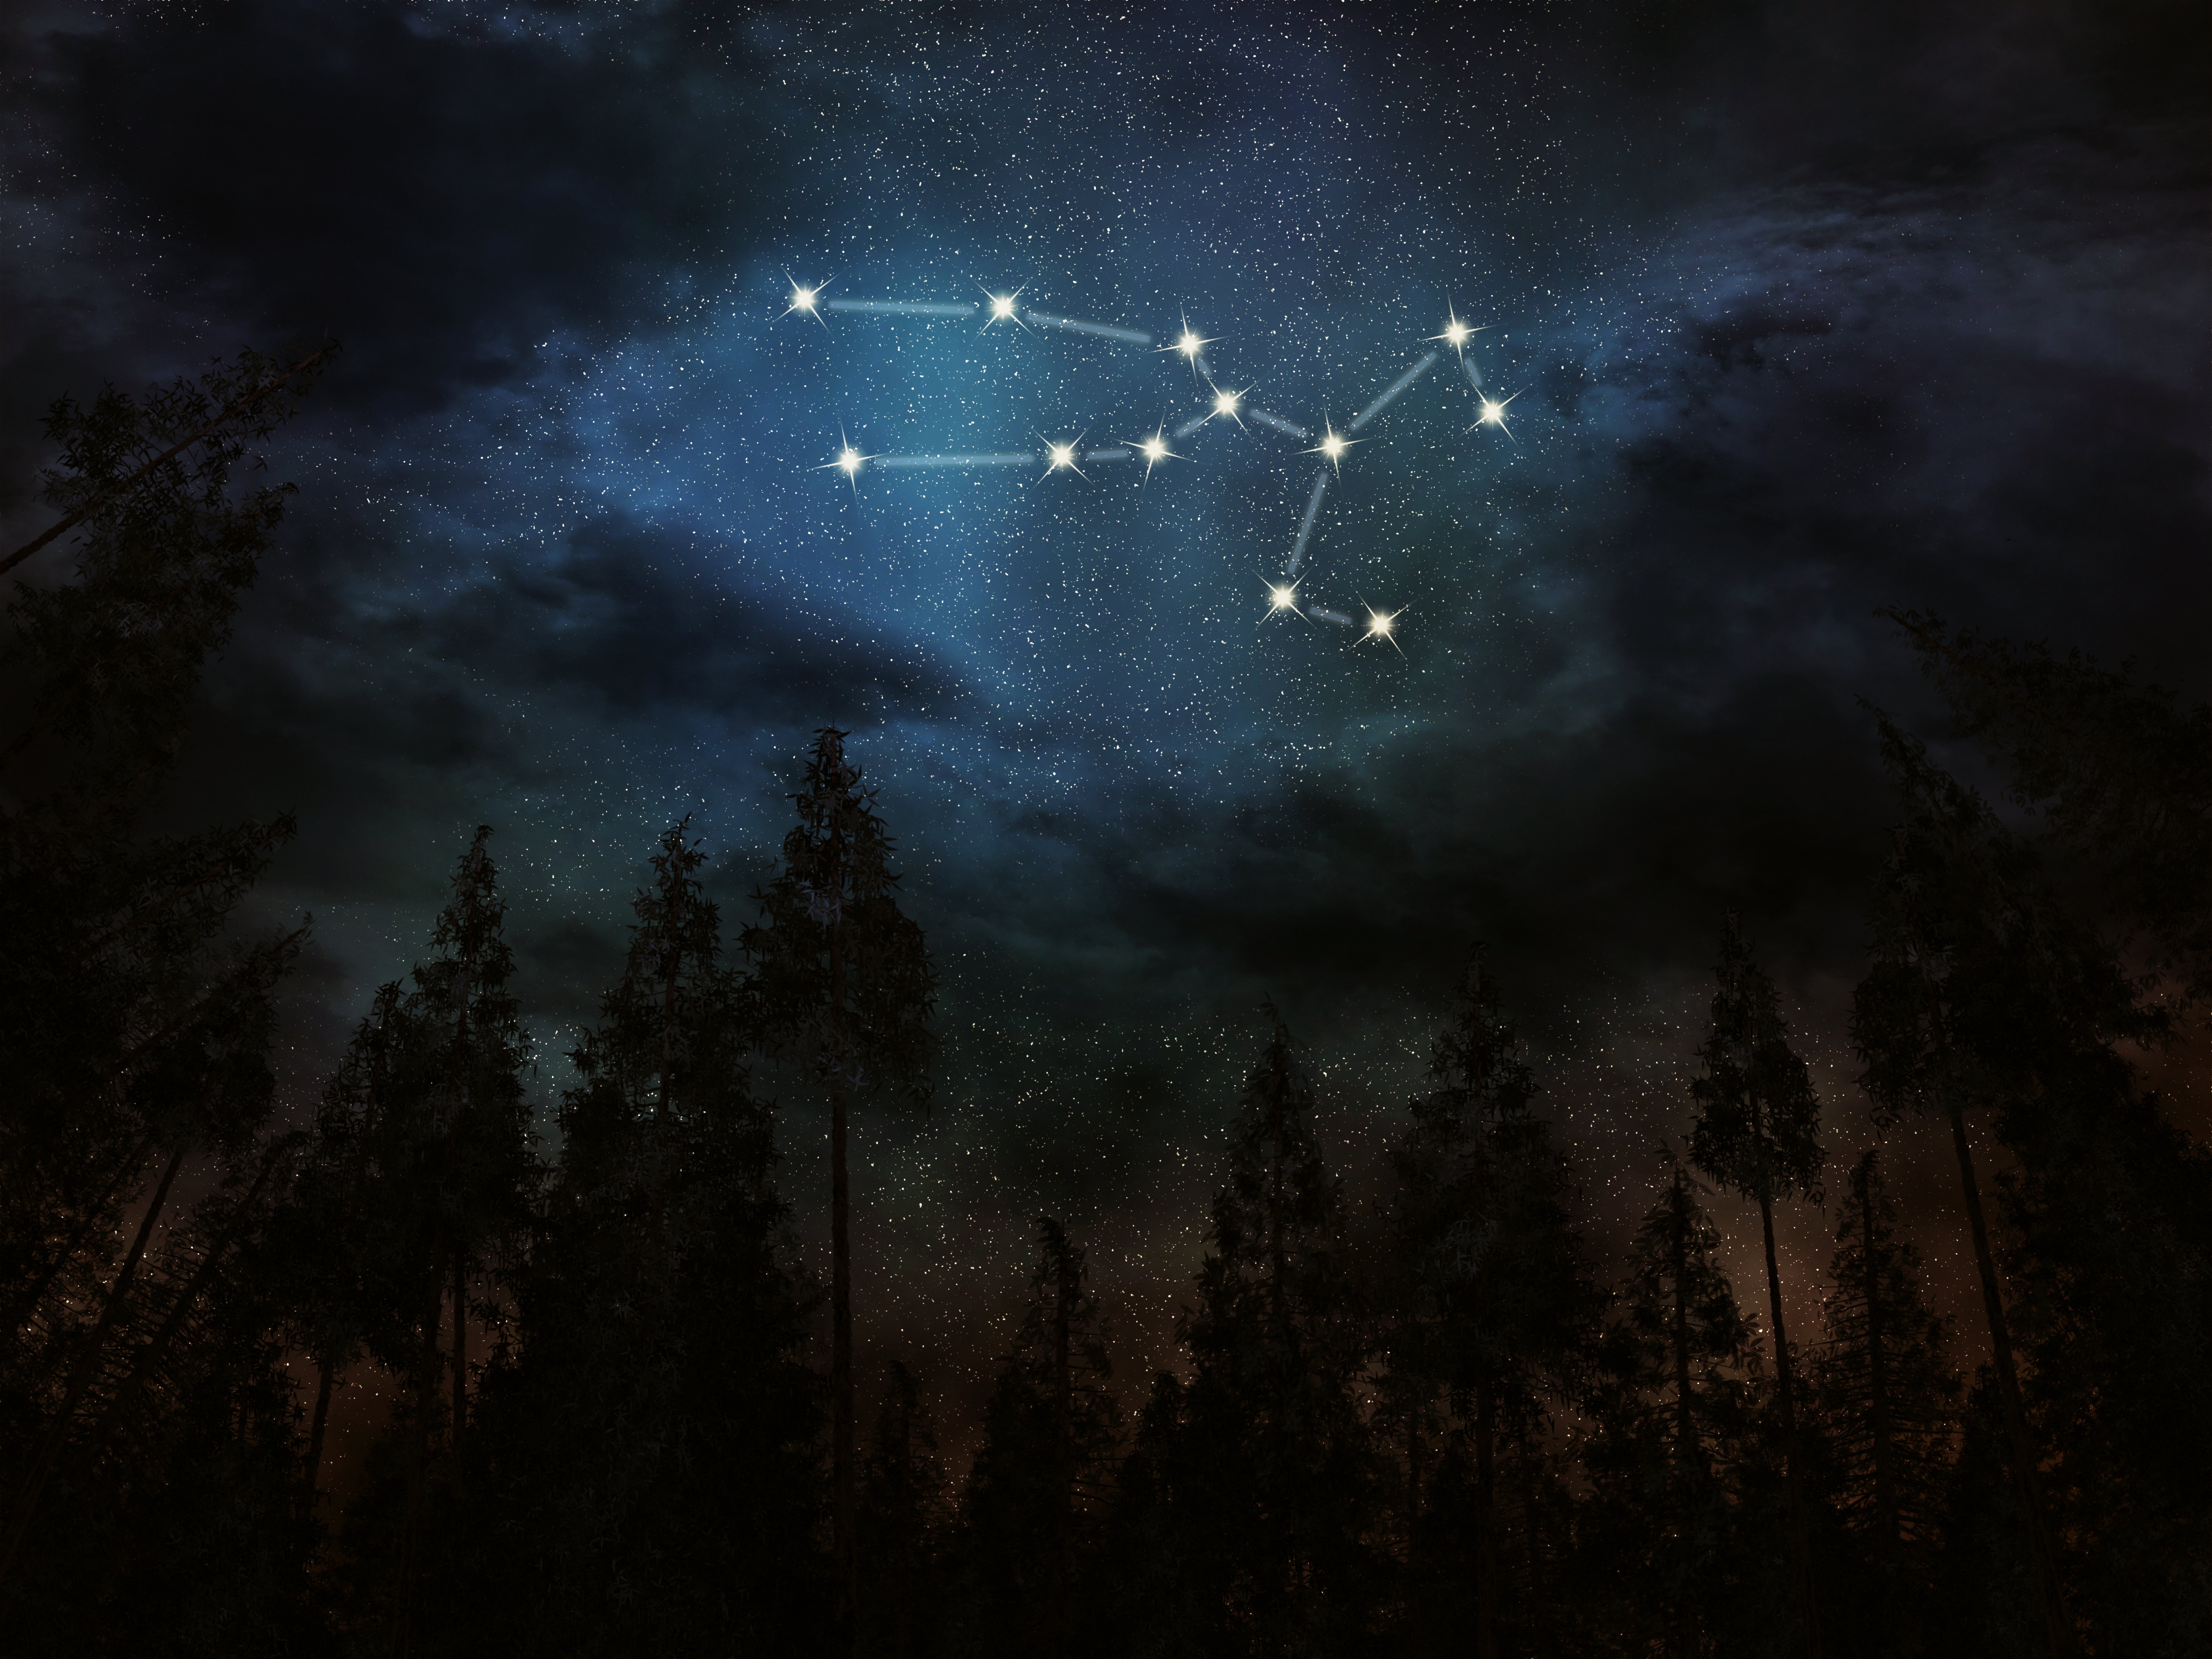 An illustration of the Taurus constellation in the night sky | Source: Shutterstock